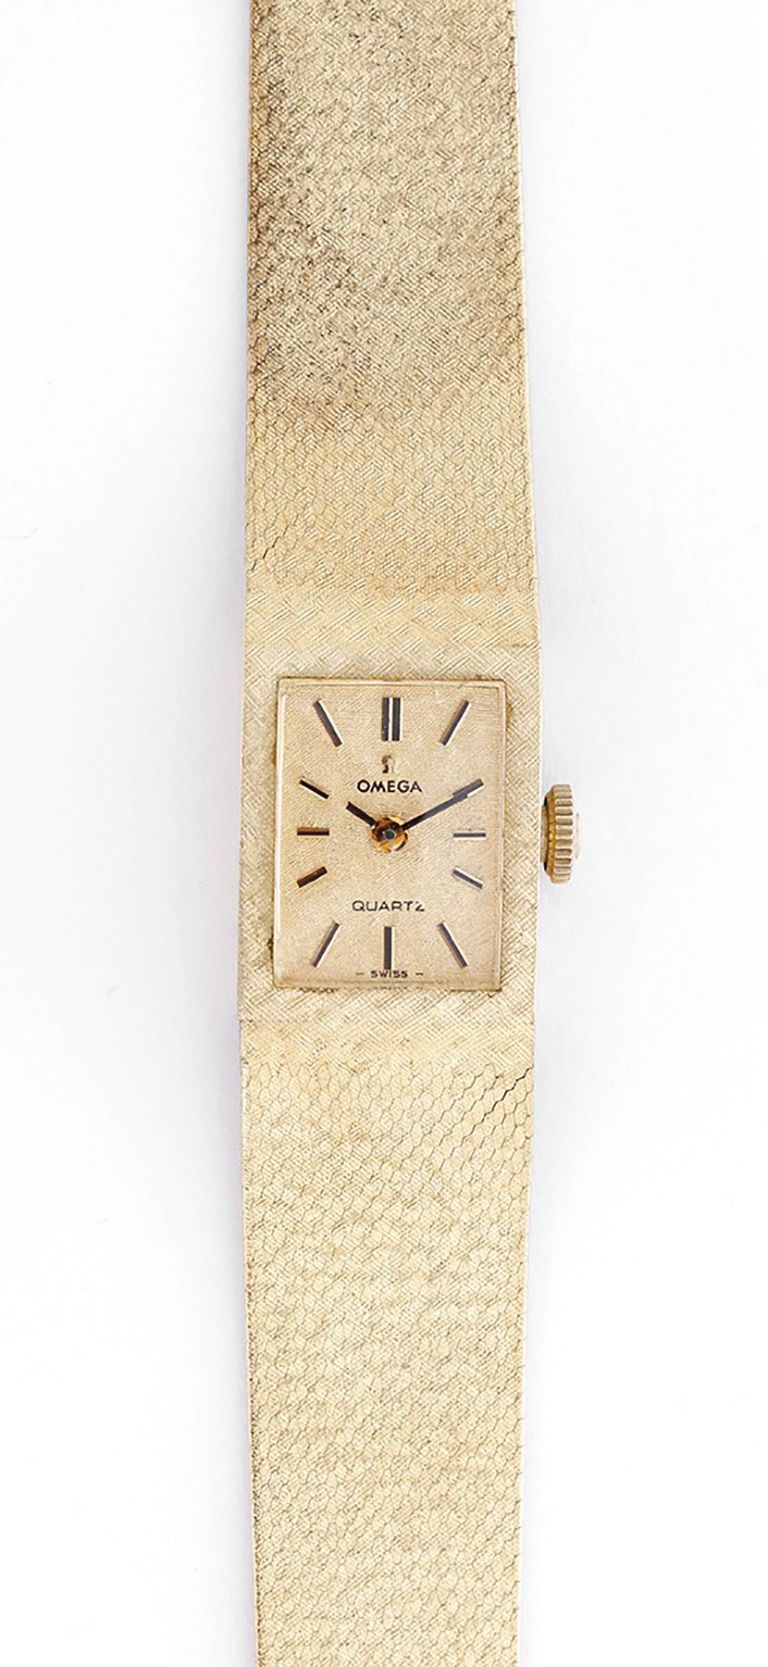 Vintage Omega Womens Watch | peacecommission.kdsg.gov.ng